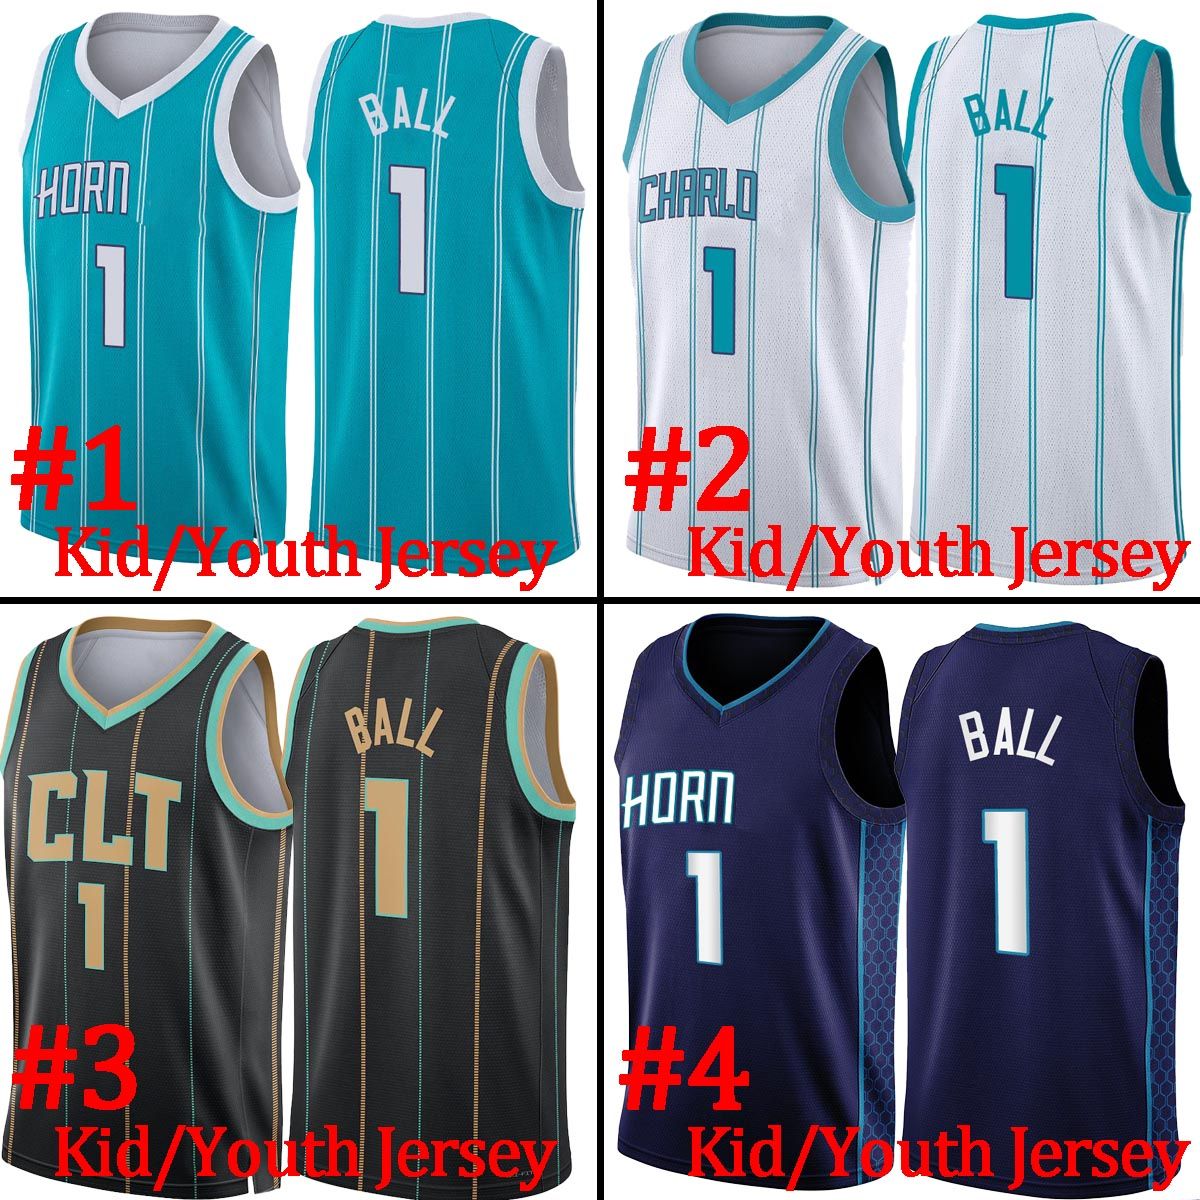 Youth/kid Jersey10